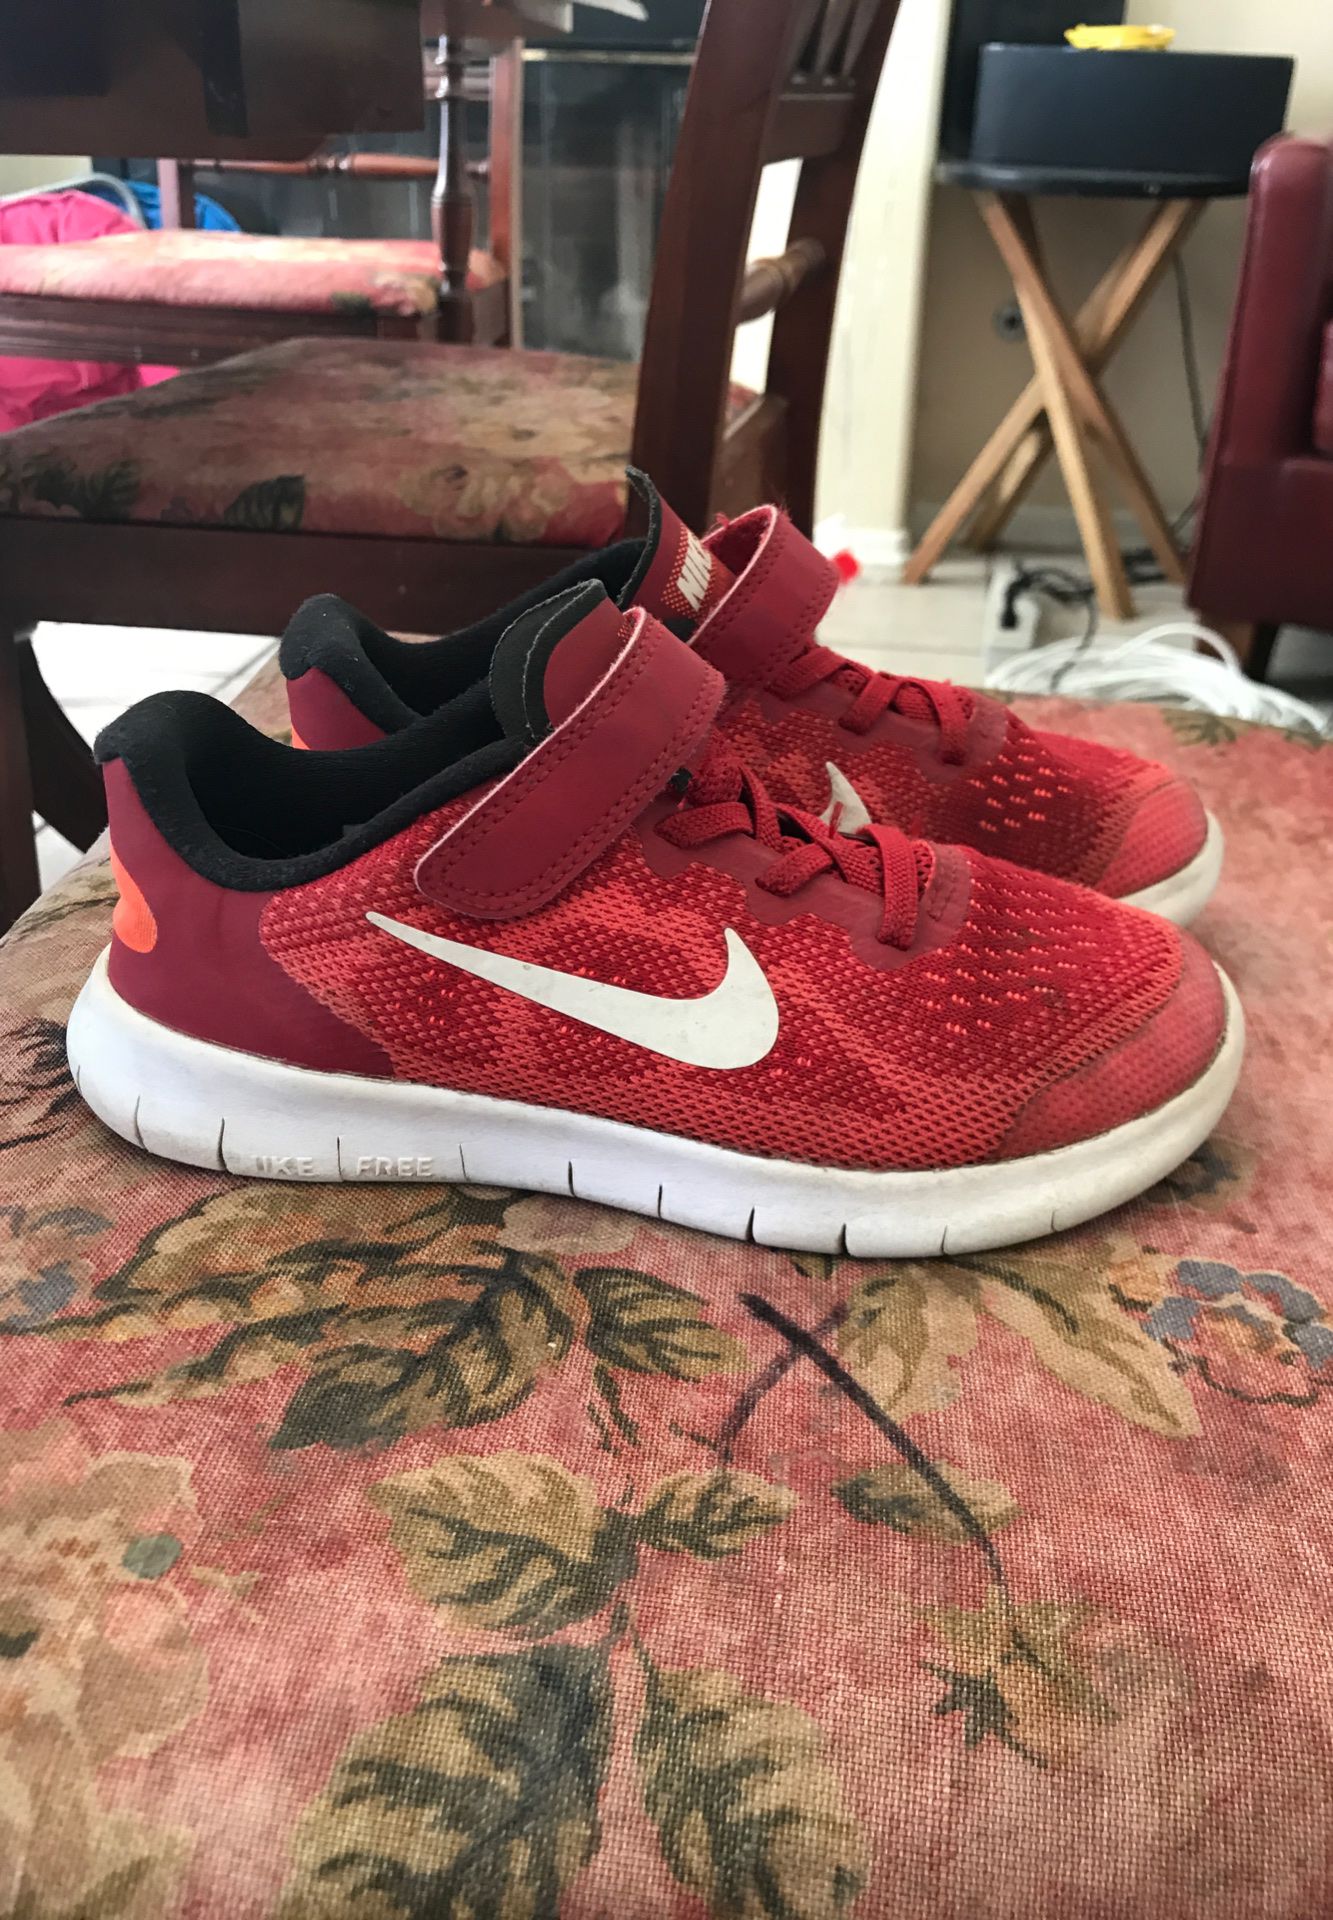 Nike youth shoes- size 2